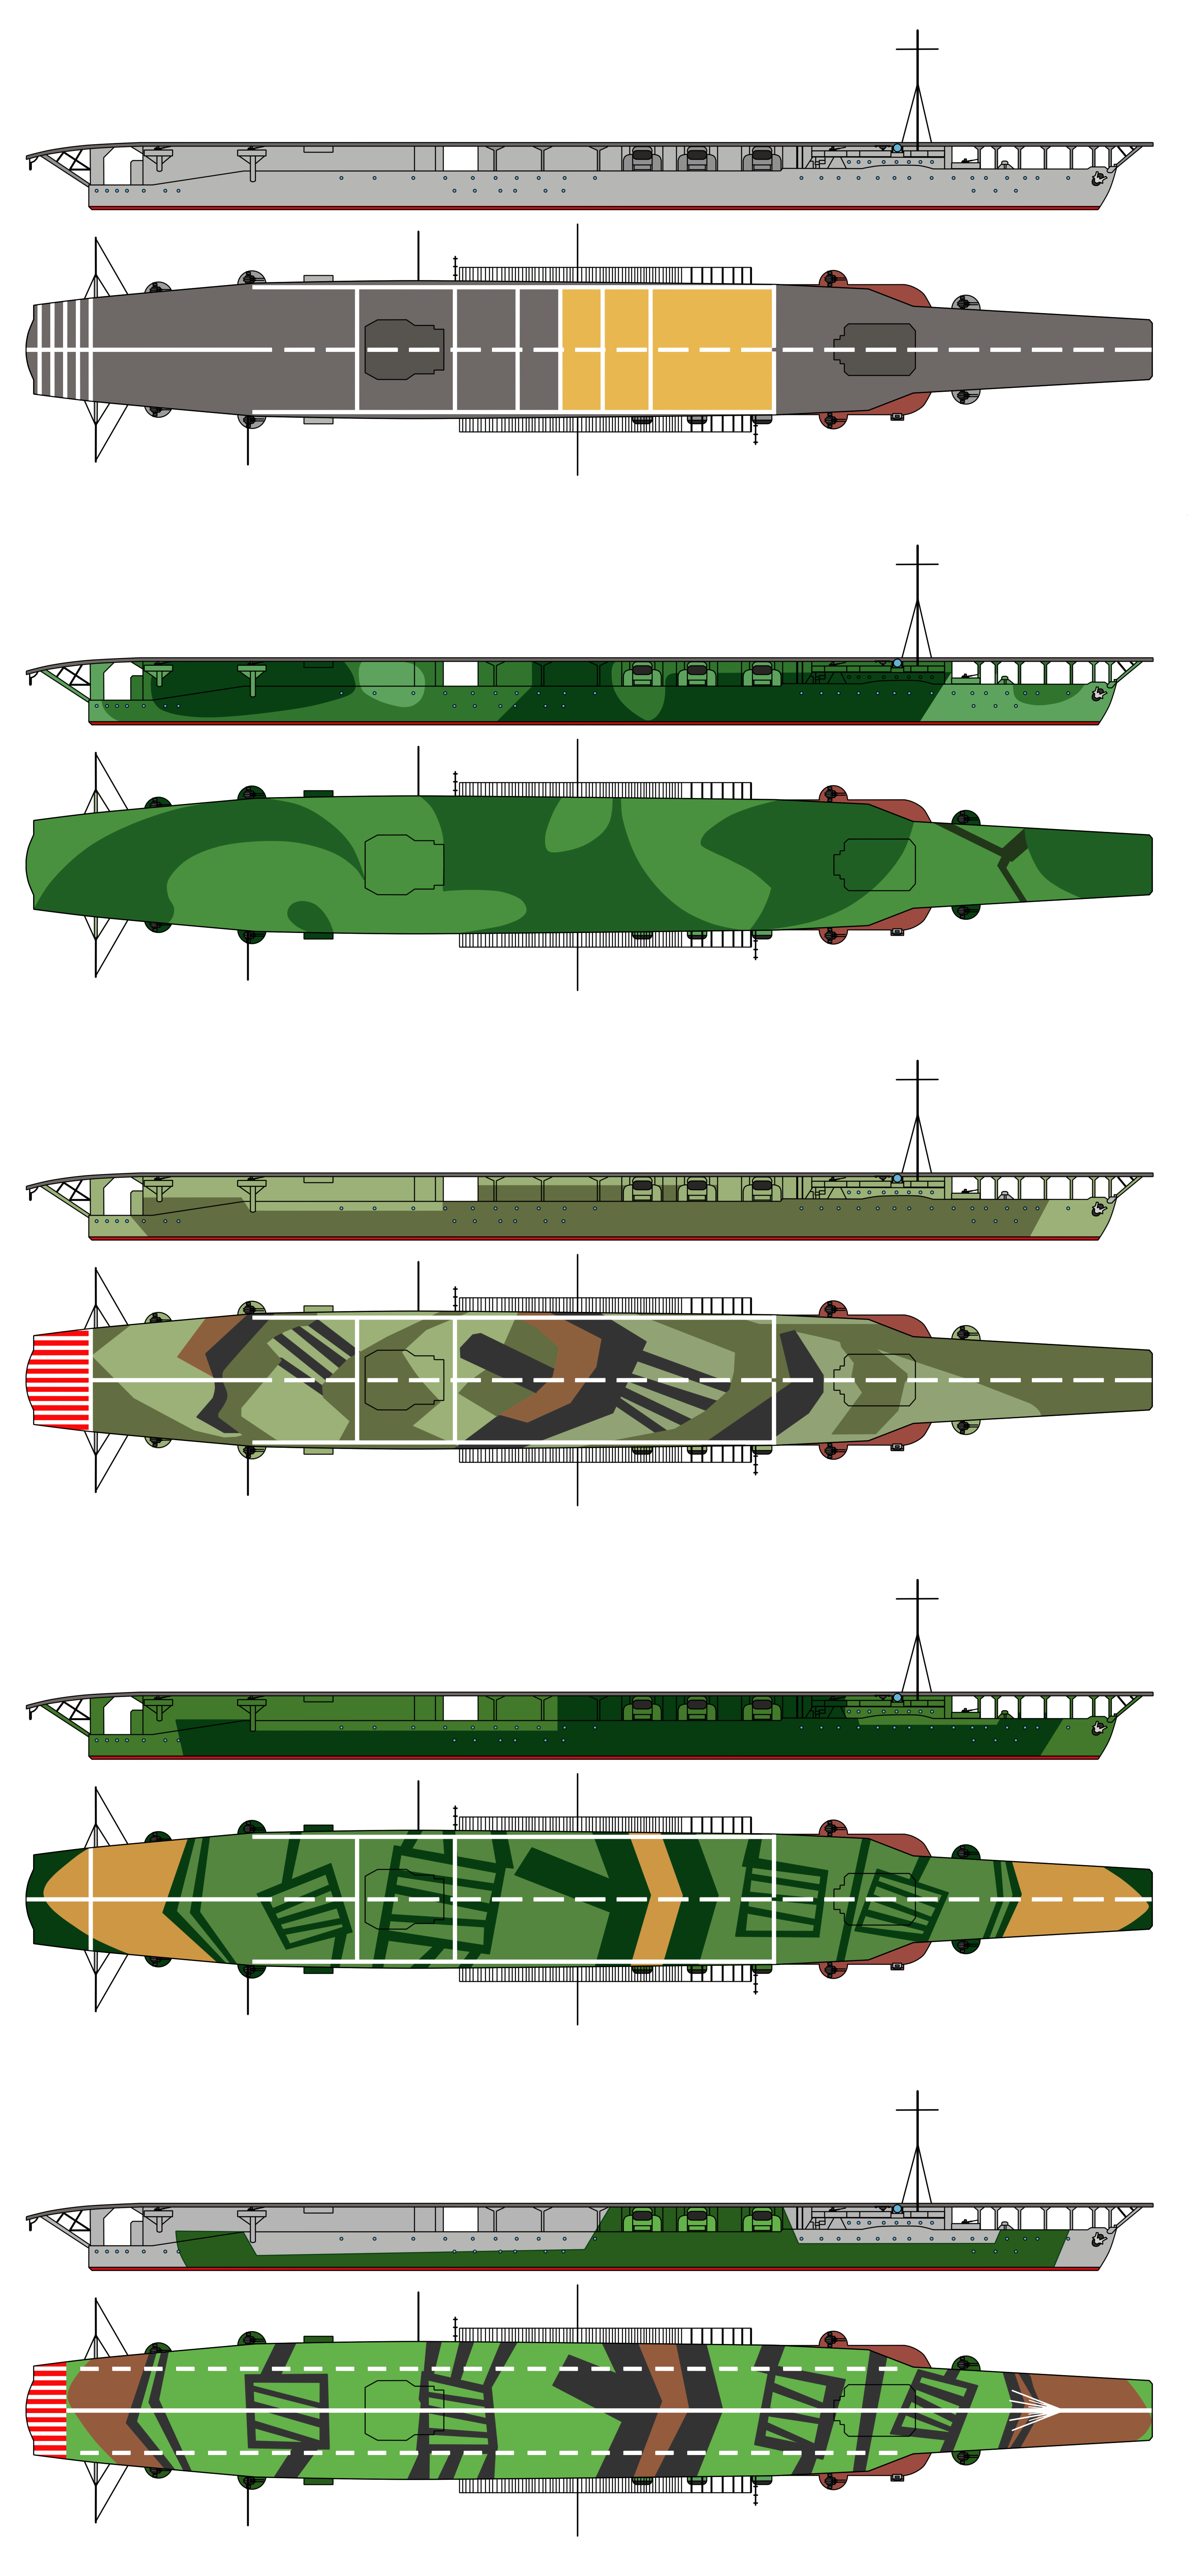 ijn_hosho_what_if_camouflage_patterns_by_tzoli-d899qlq.png